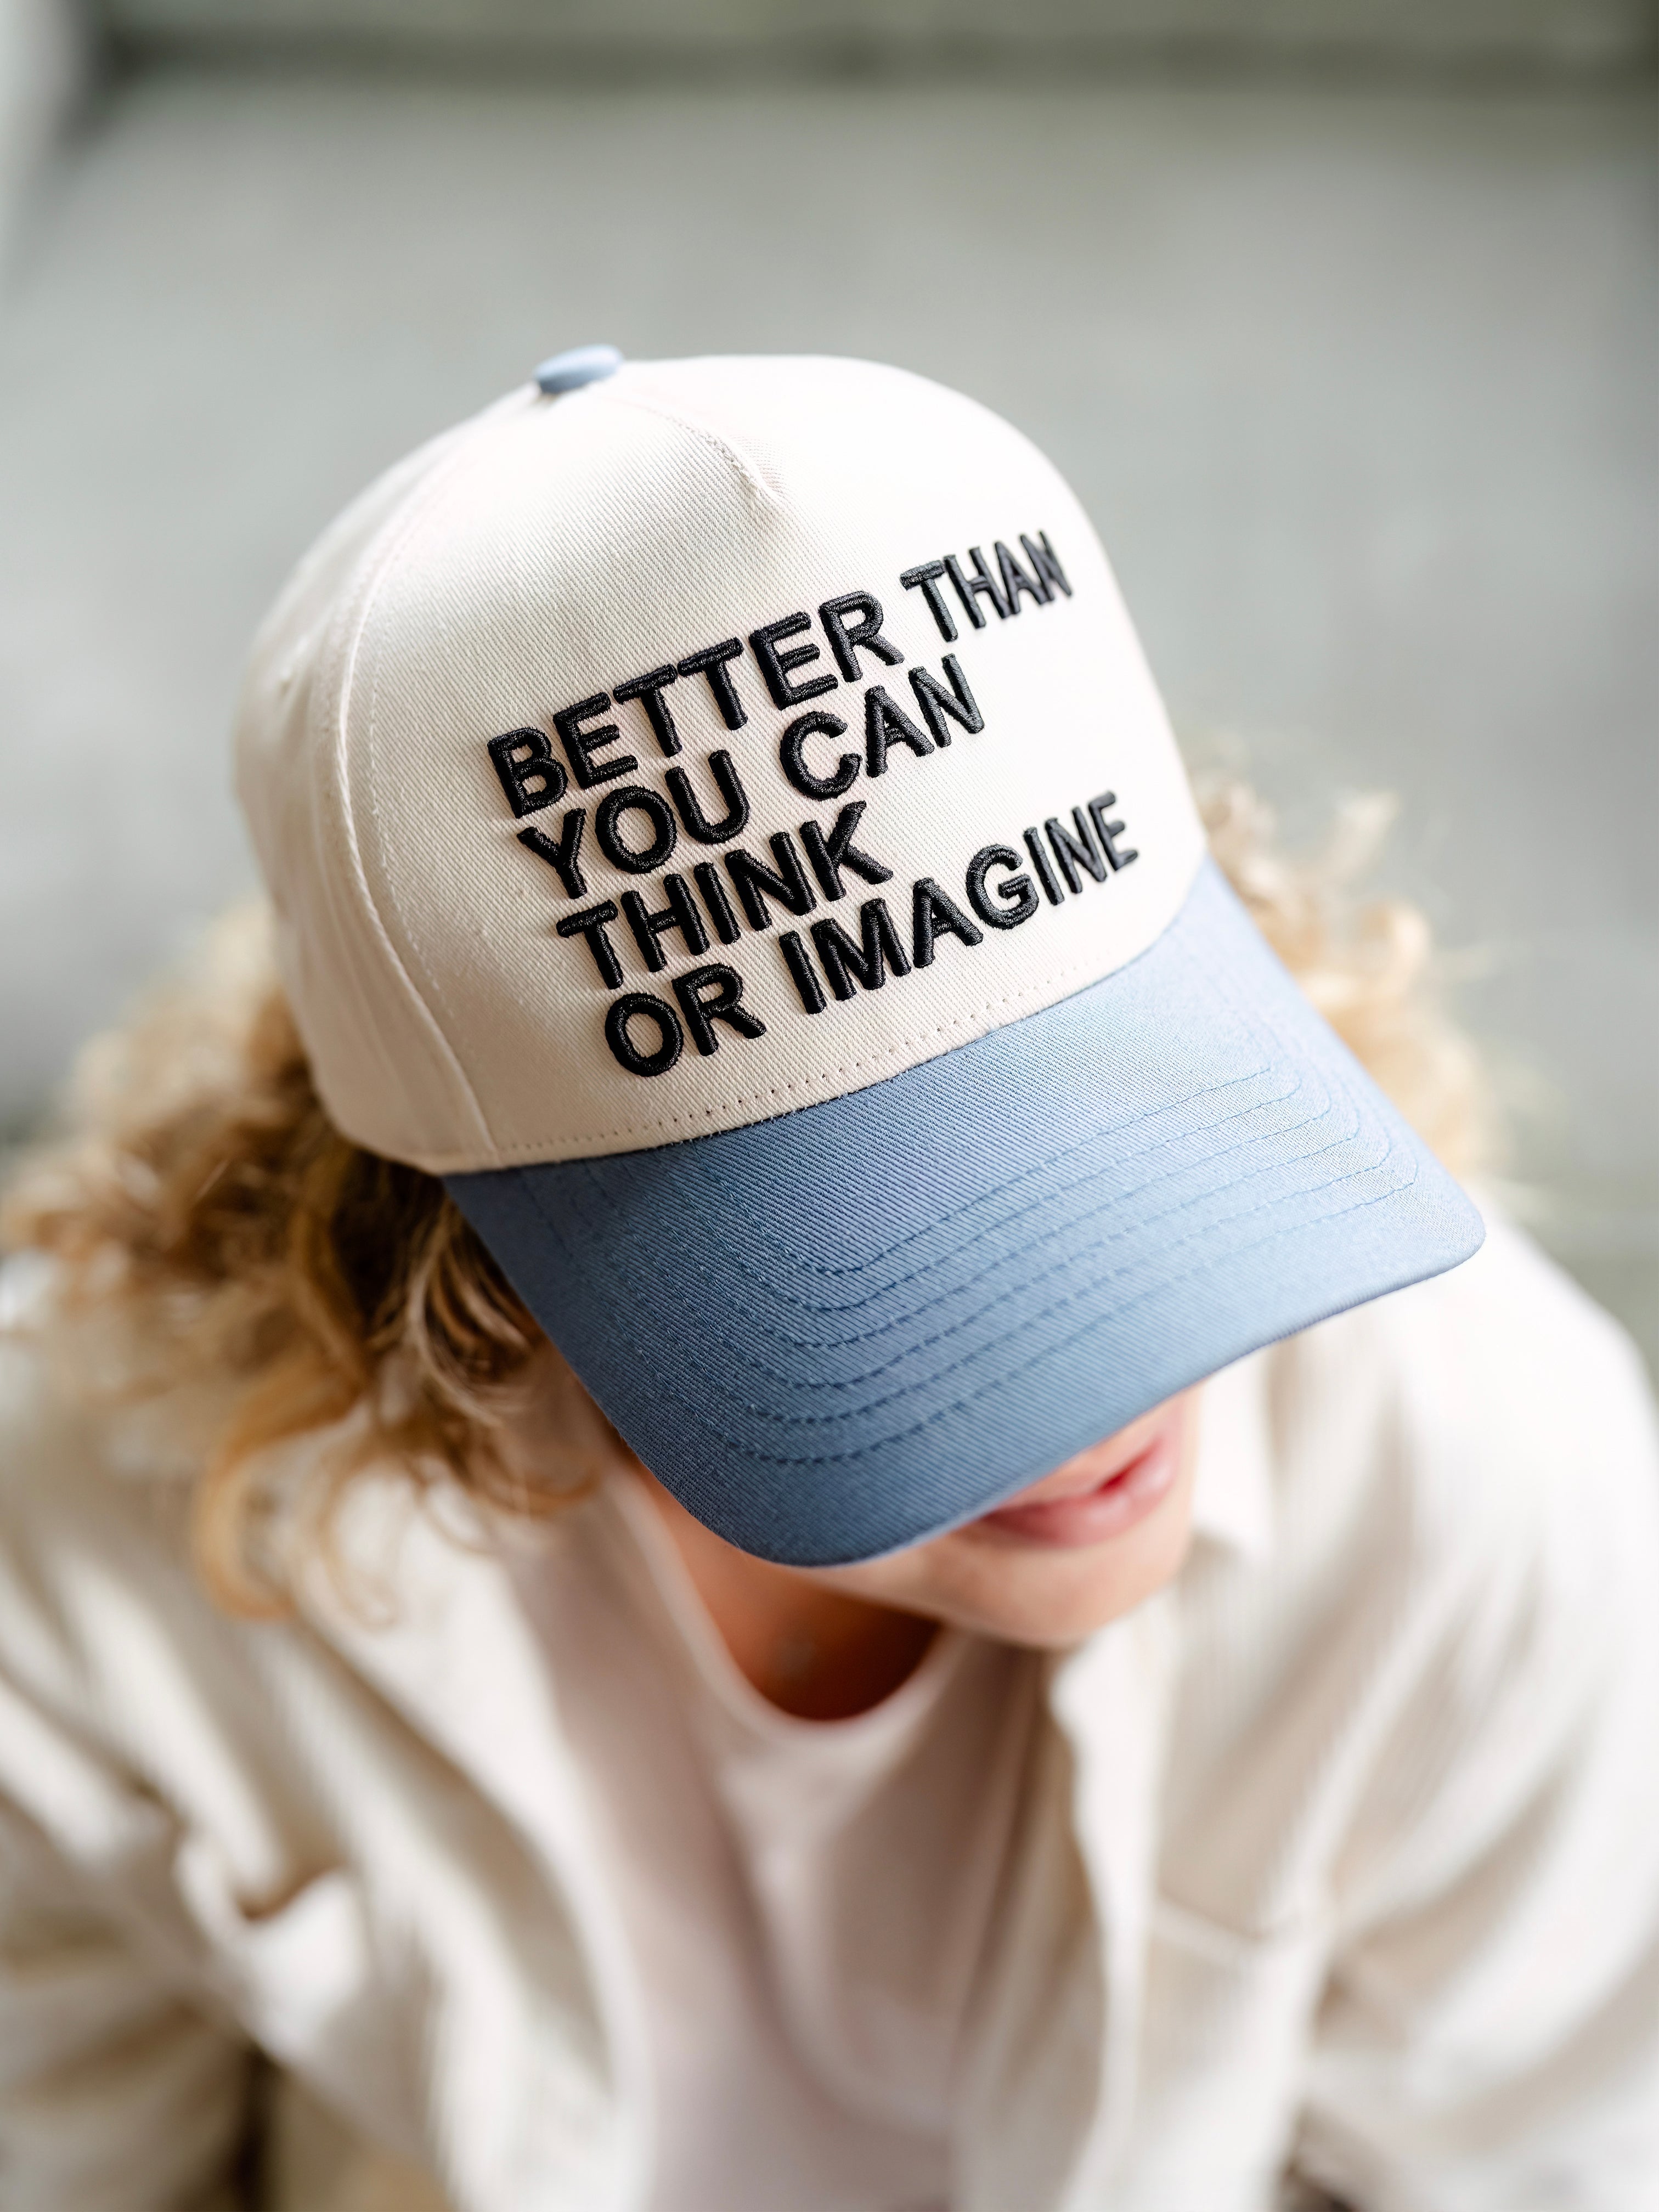 Hat: Better than you can think